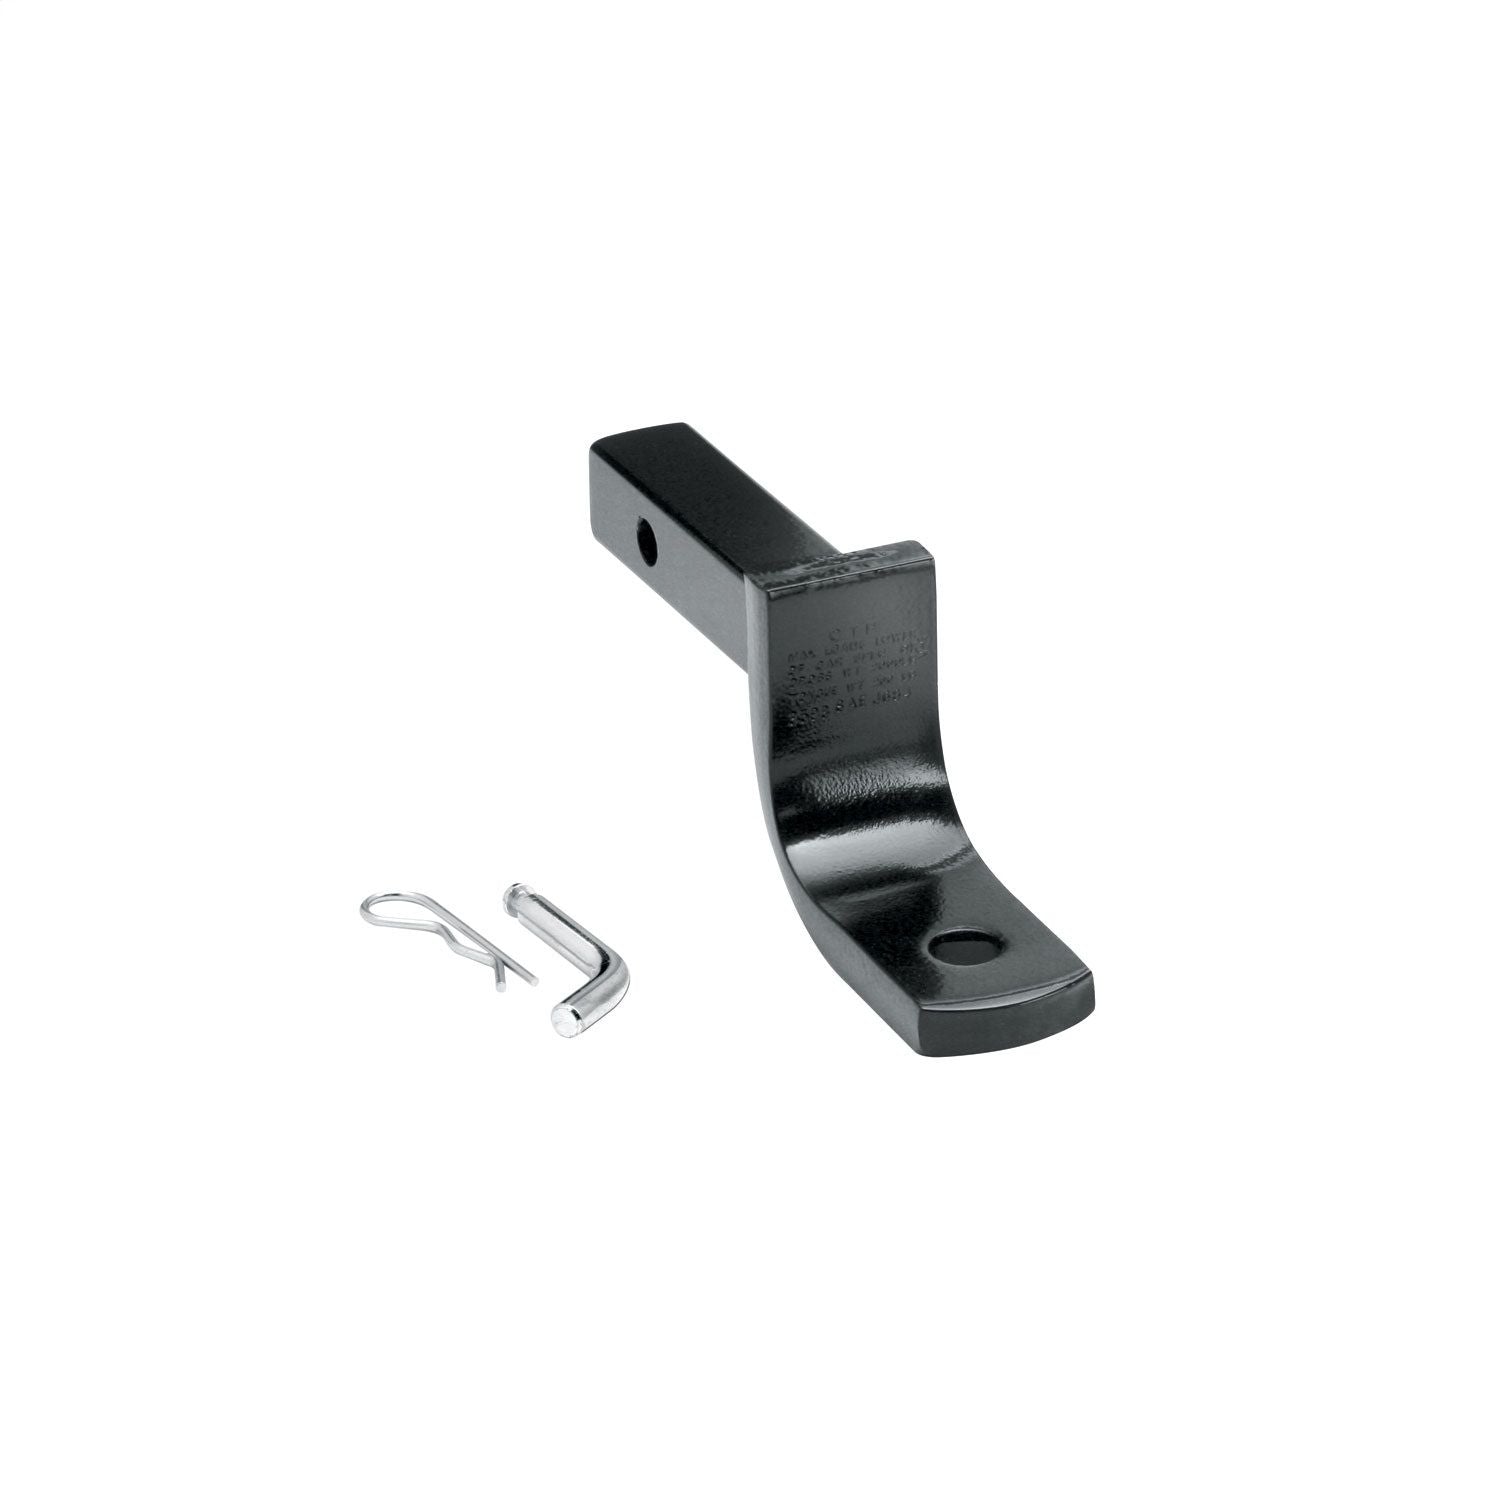 Draw-Tite 3593 - Class 1, 2-3/4" Drop / 2-3/4" Rise Black Ball Mount with Pin and Clip for 1-1/4" Receivers